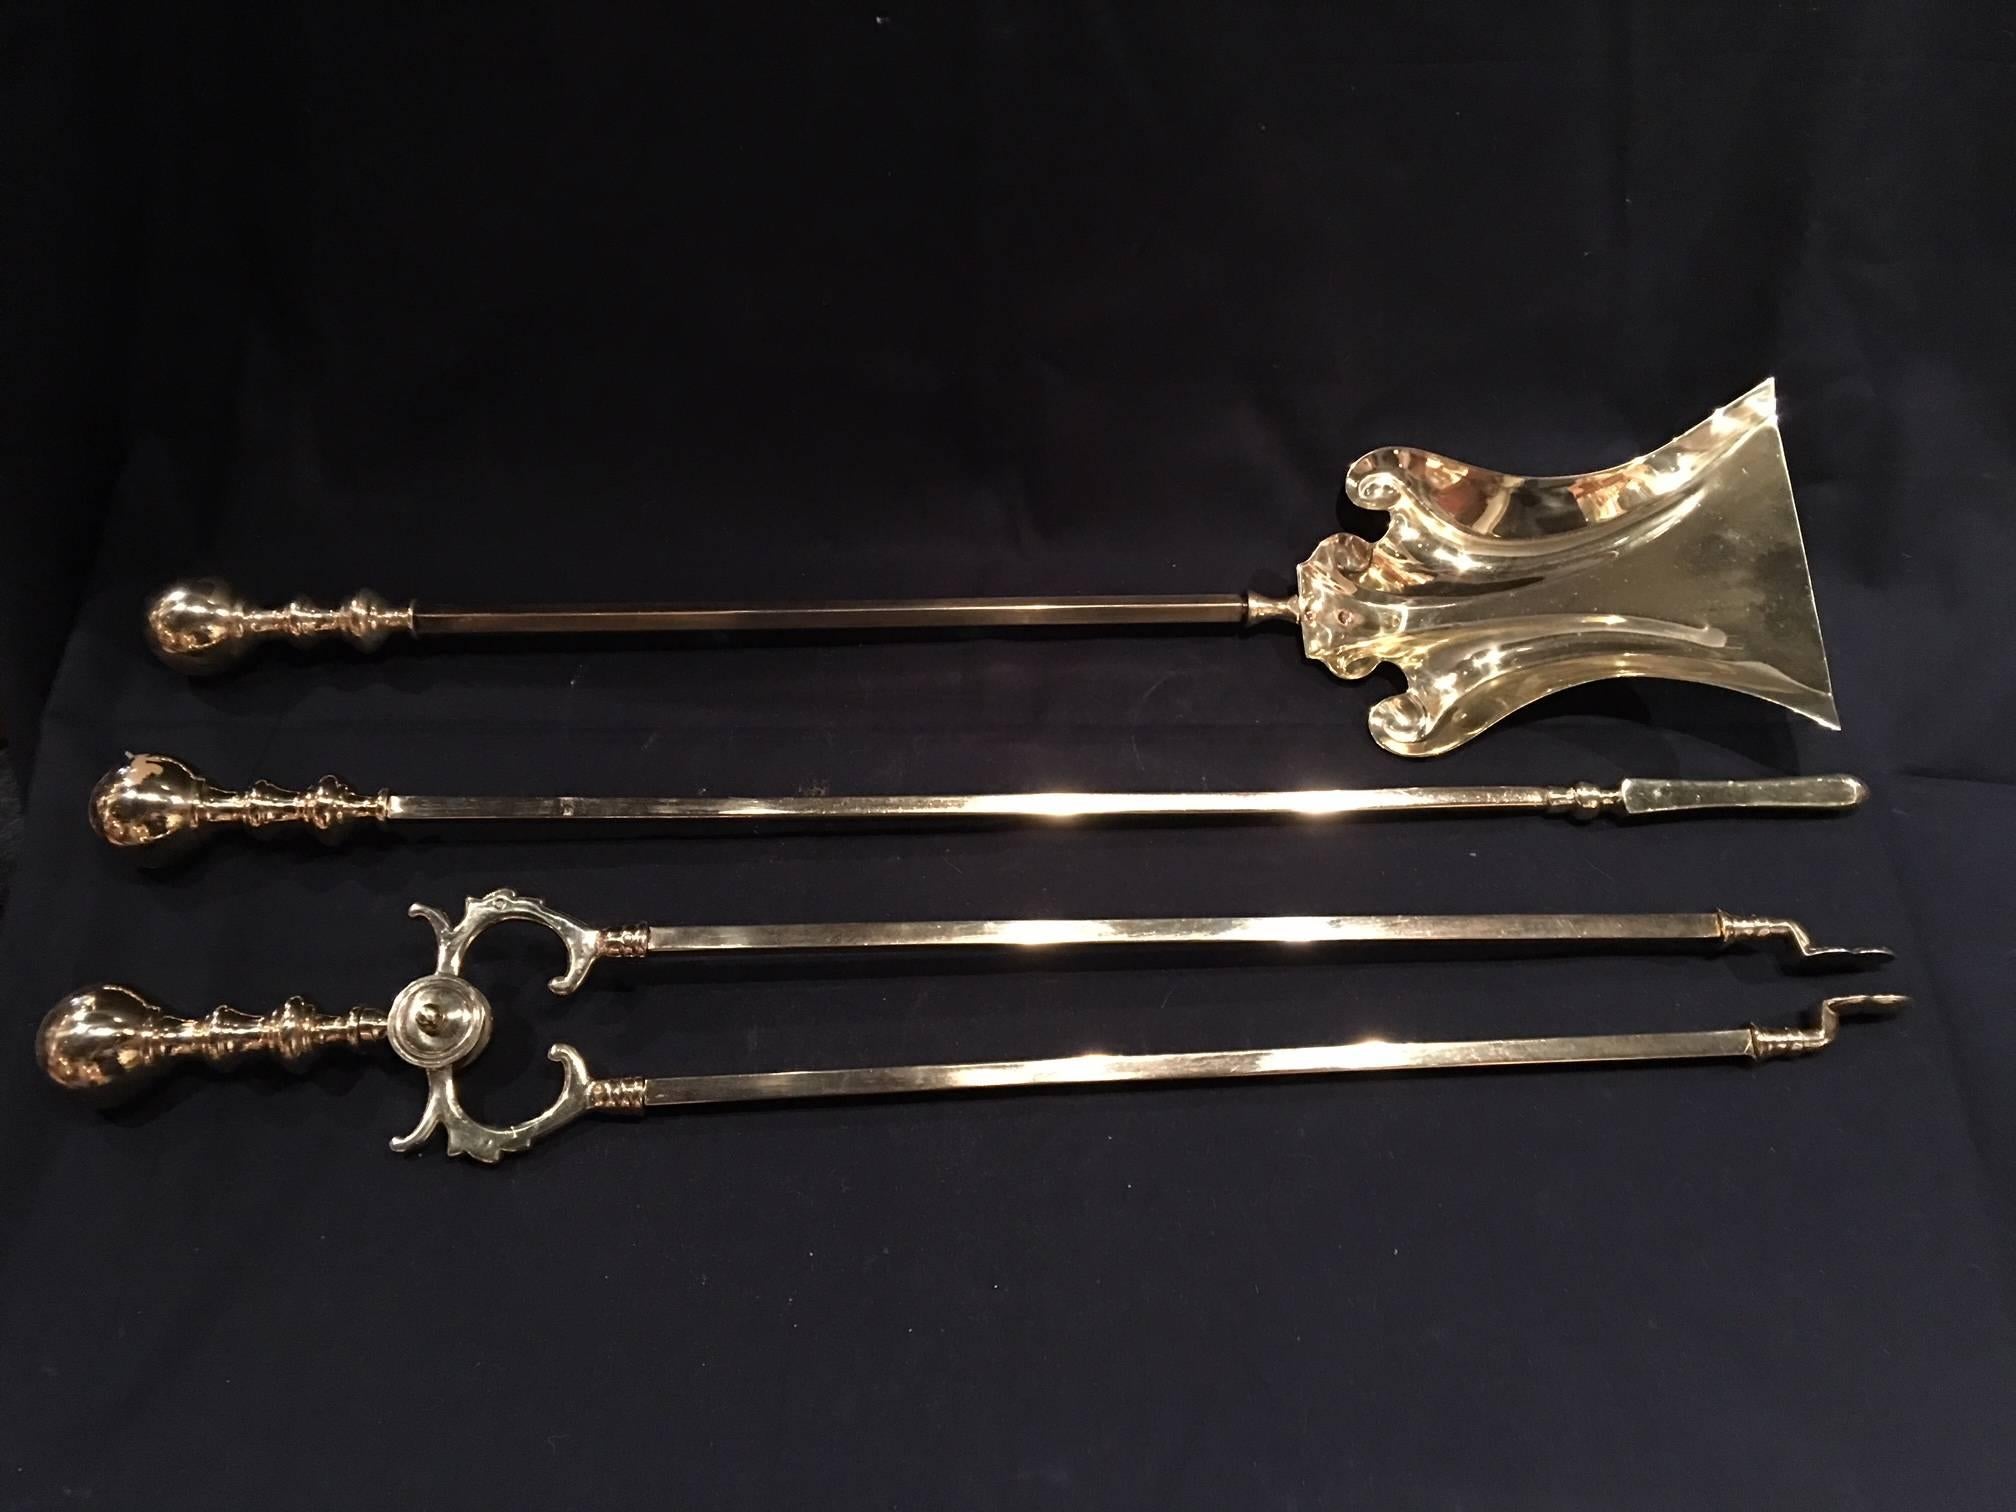 French aet of three polished brass fire irons, 19th century.